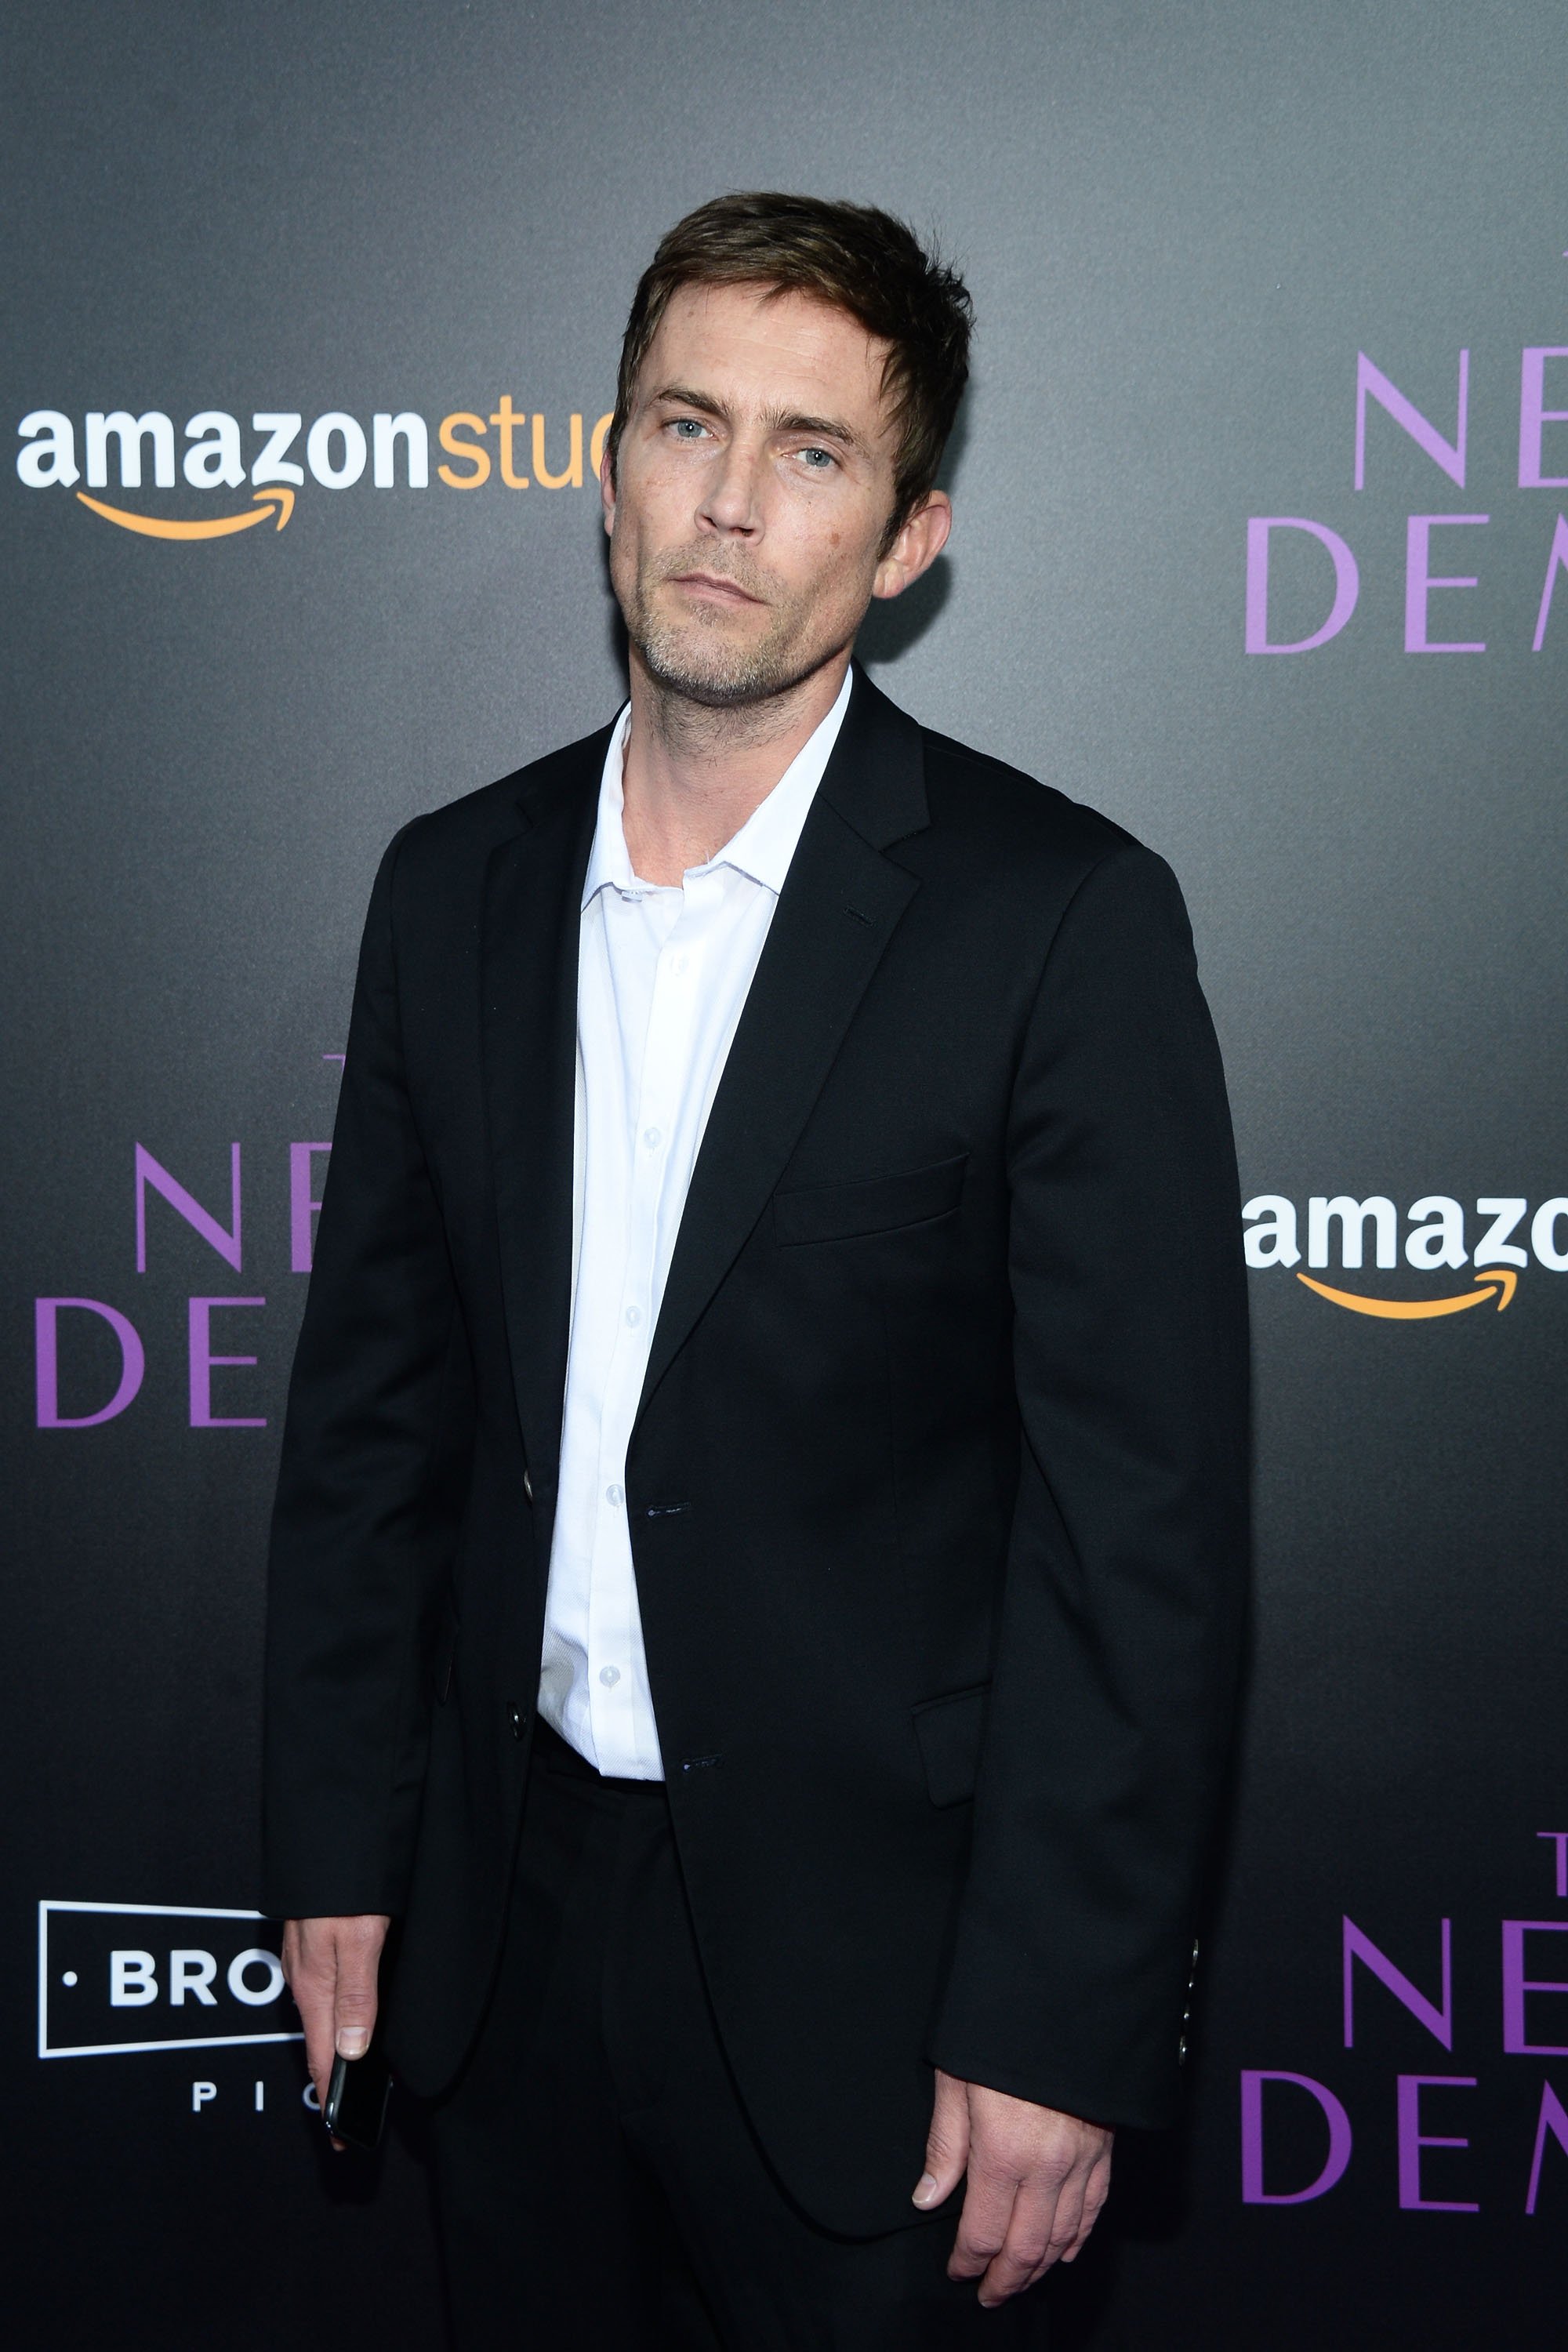 Desmond Harrington attends the premiere of Amazon's "The Neon Demon" at ArcLight Cinemas Cinerama Dome on June 14, 2016, in Hollywood, California. | Source: Getty Images.